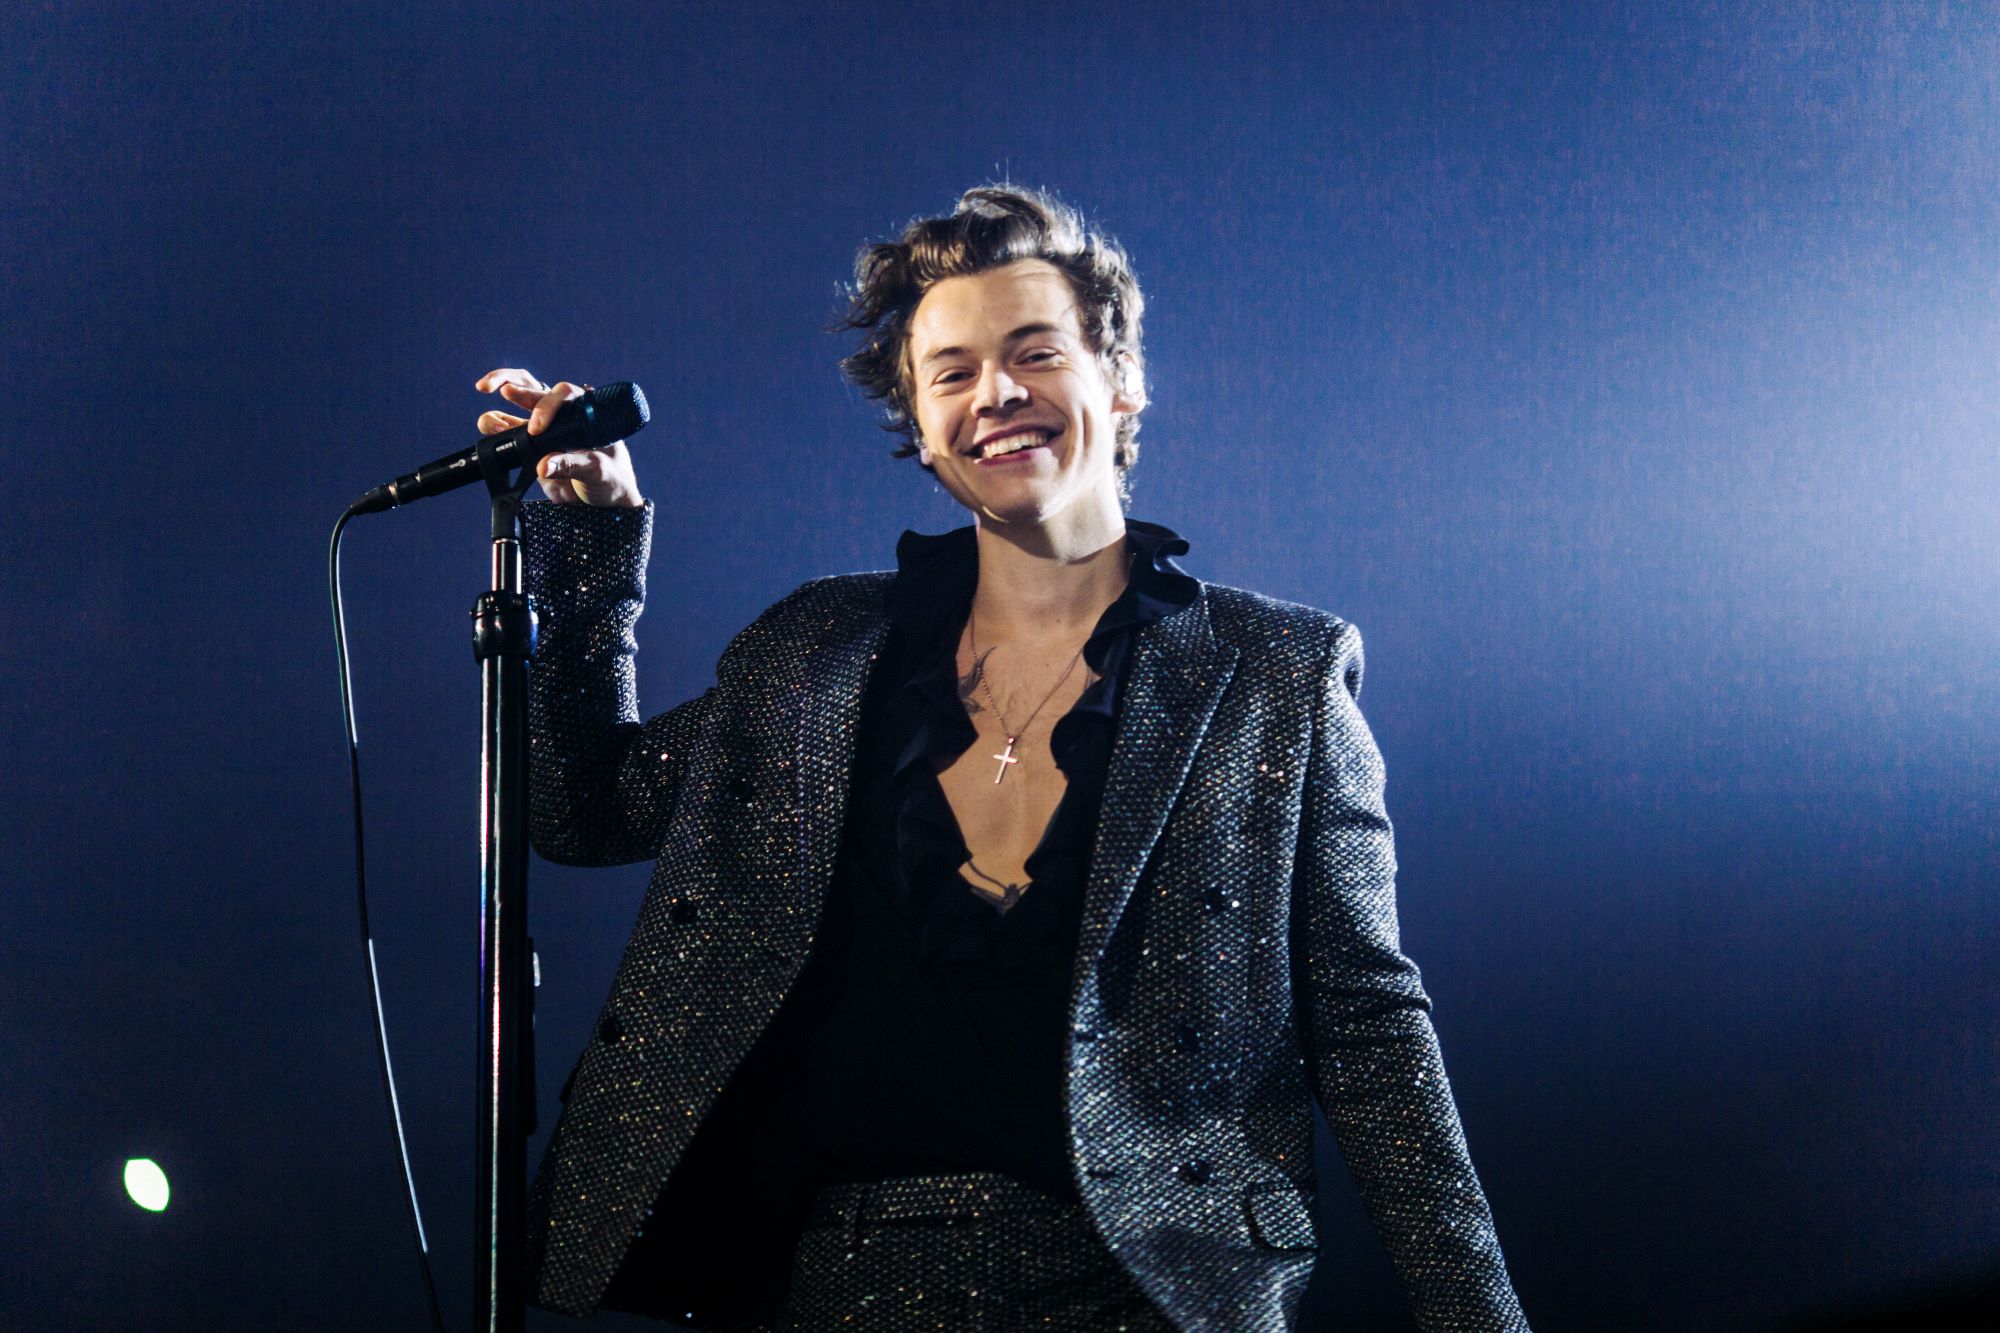 Harry Styles, who is featured in a deleted scene from Marvel's 'Eternals,' wears a diamond-studded blazer over a black button-down shirt while singing onstage.